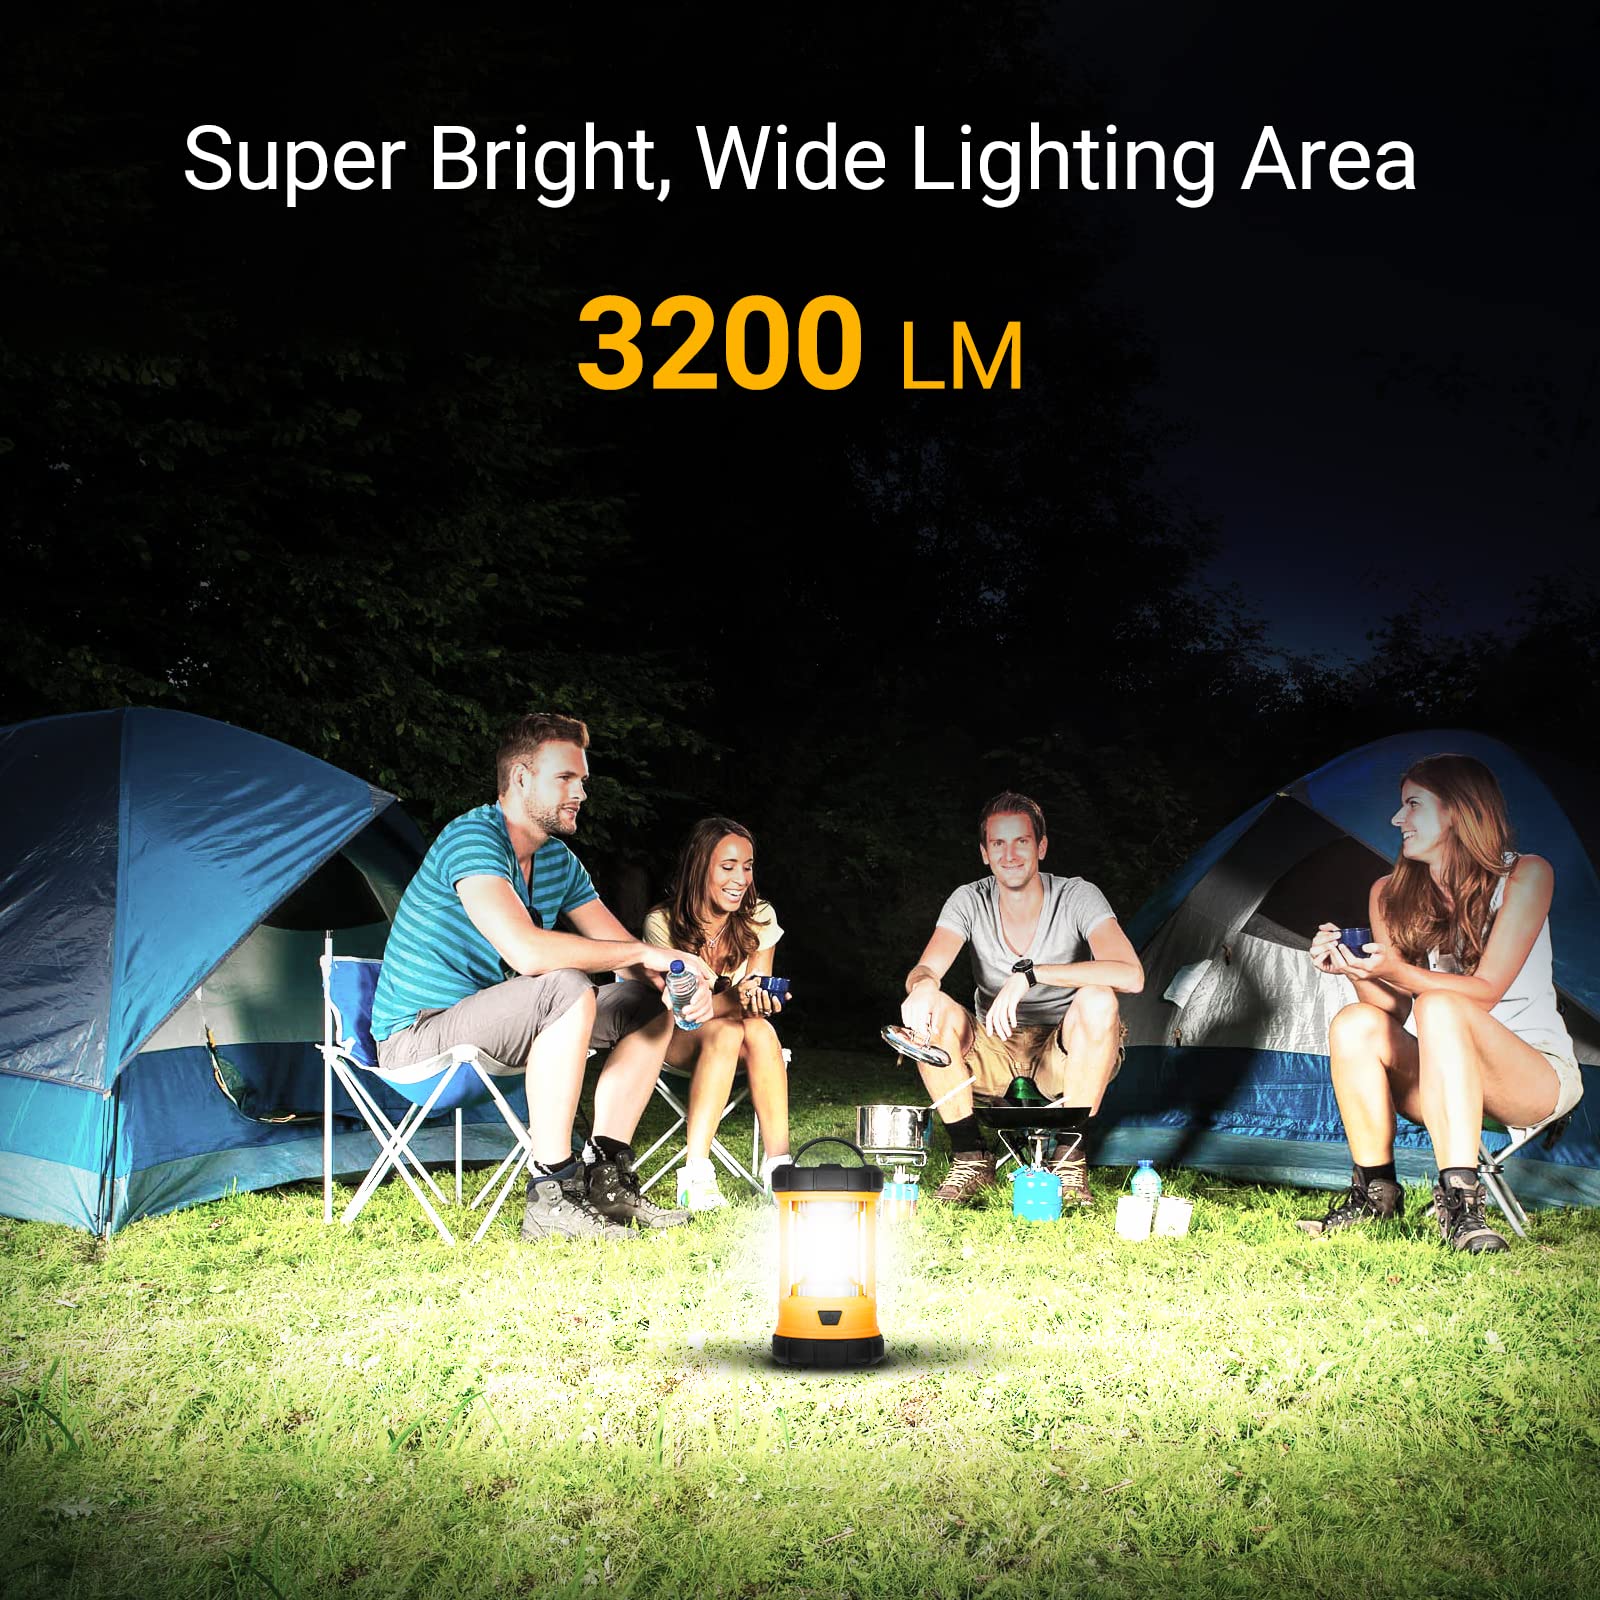 CT CAPETRONIX Camping Lantern, 3200LM Bright Camping Light, 4600mAh Power Bank Rechargeable LED Lantern for Power Outages, 5 Light Modes Lante